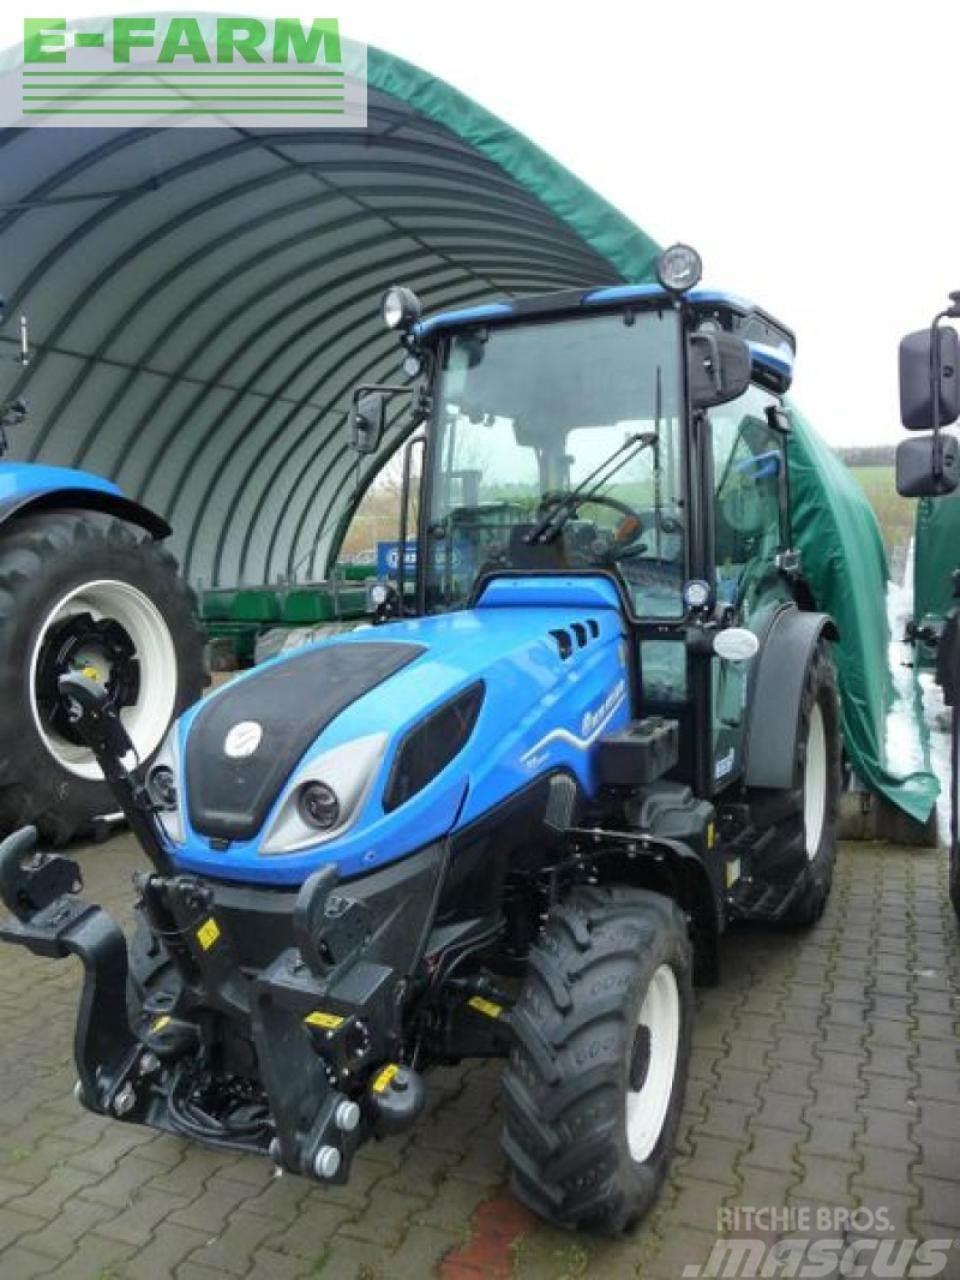 New Holland t4.100 n cab stage v Tractors